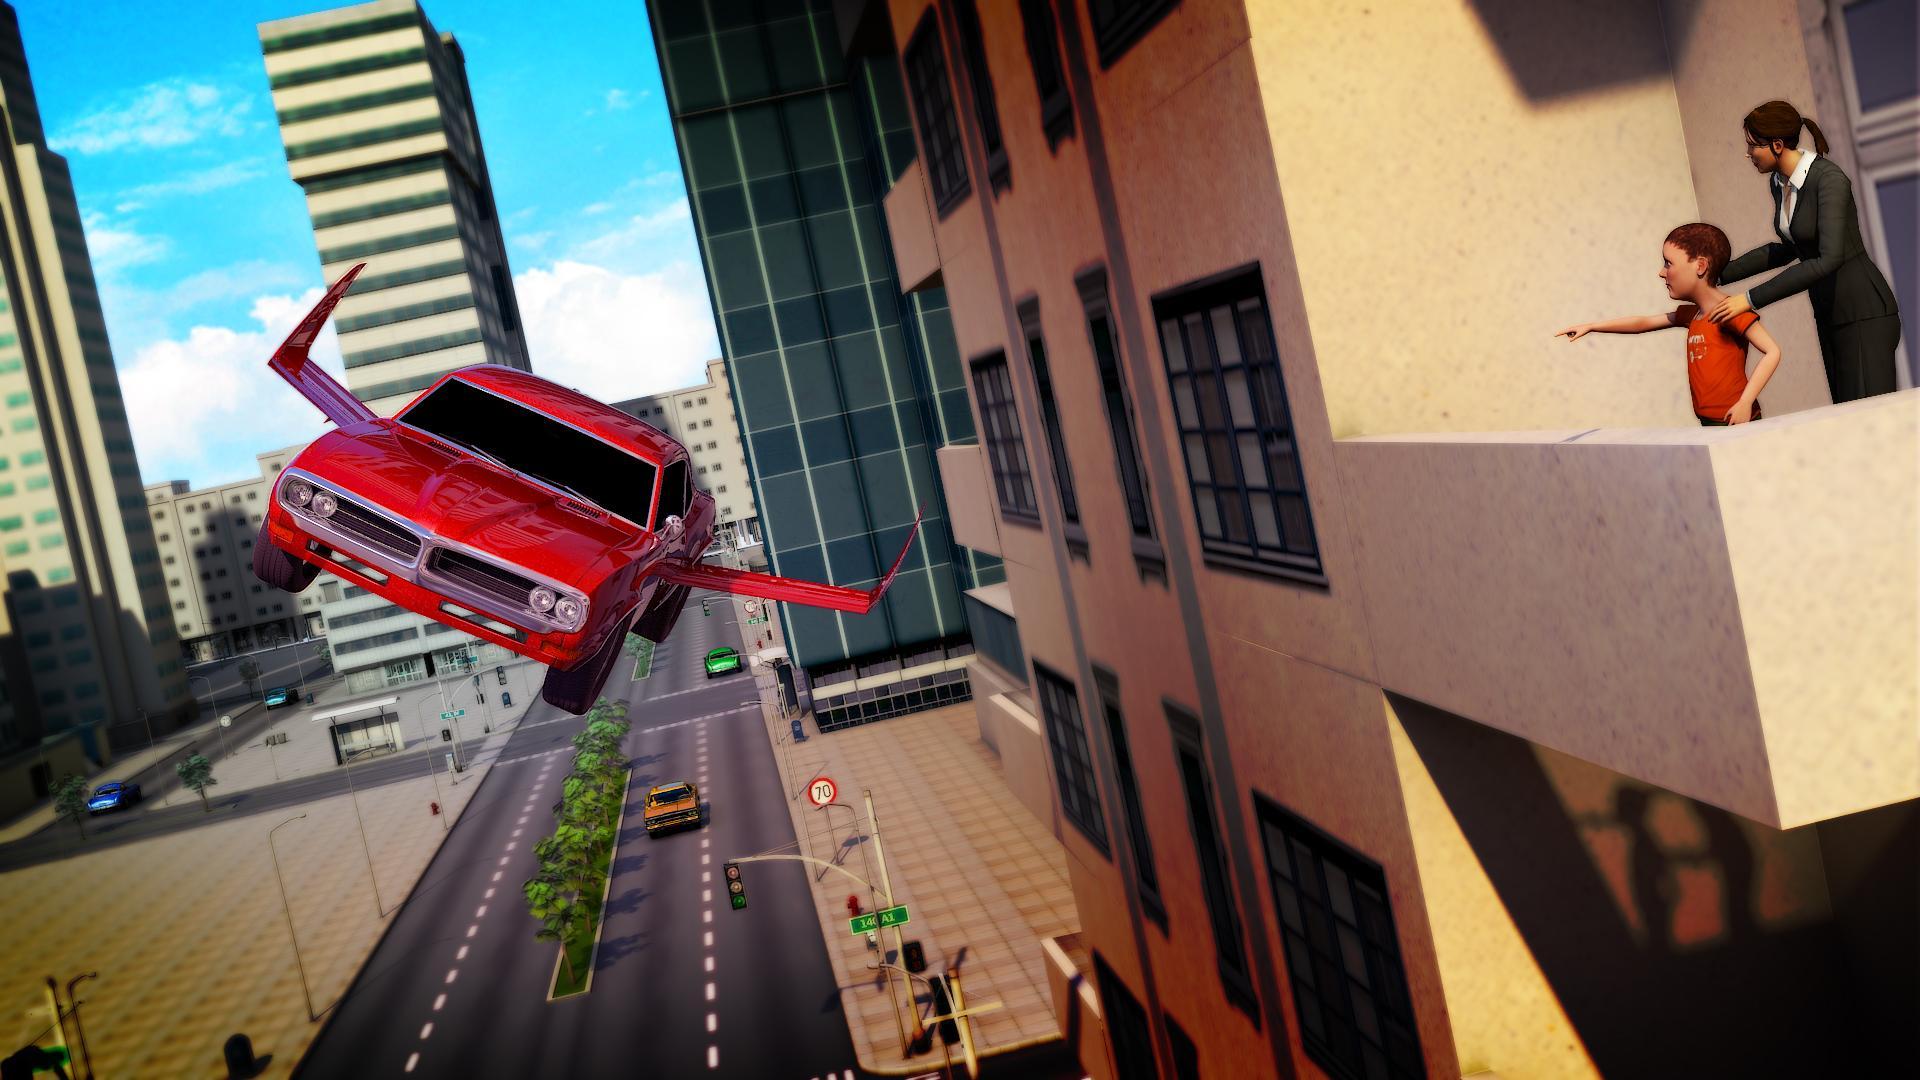 Us Flying Car Driving Simulator 2019 For Android Apk Download